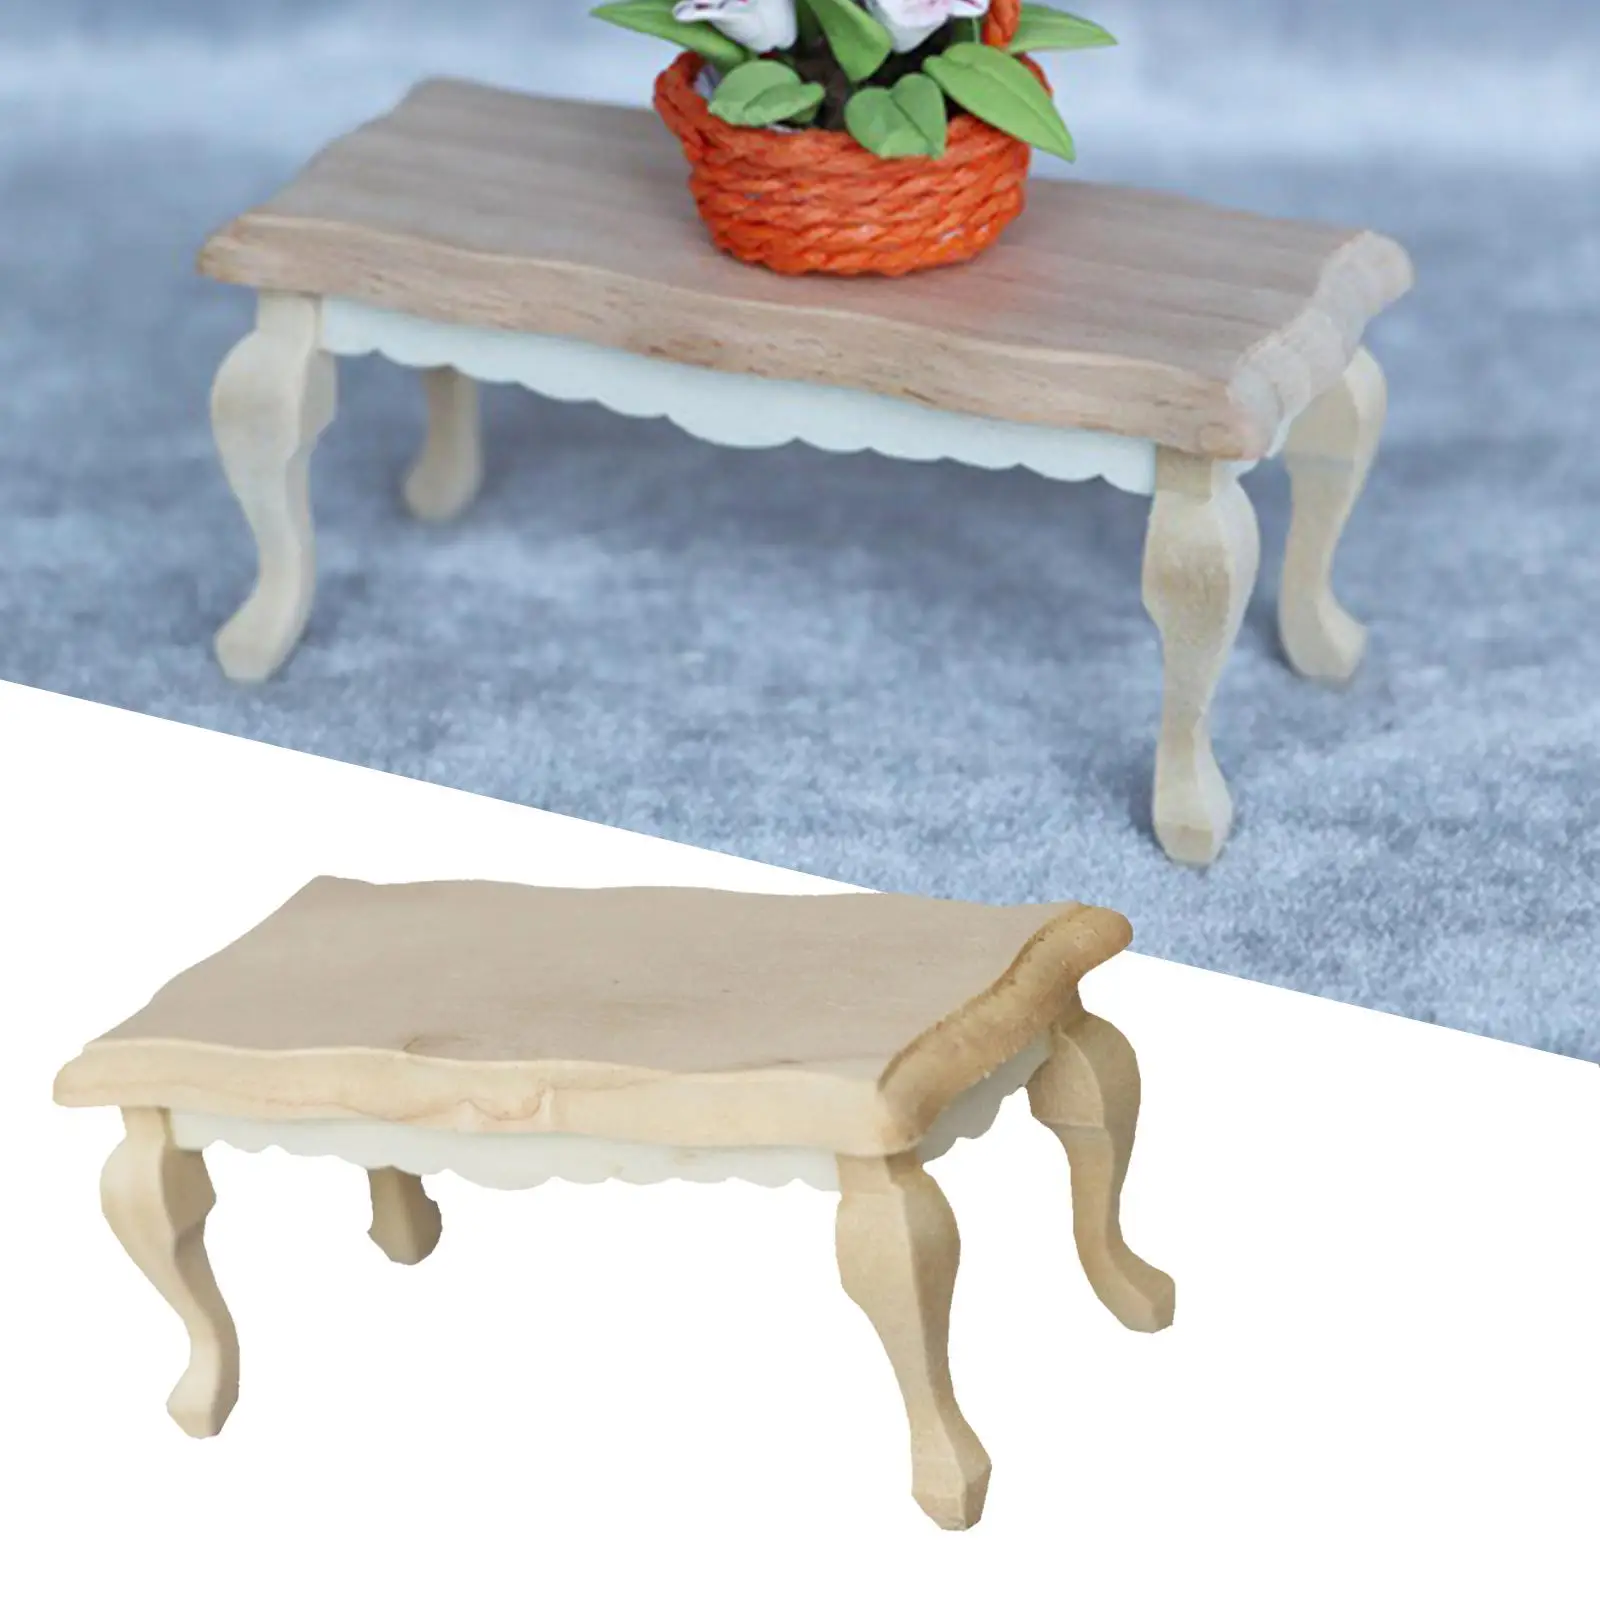 1/12 Scale Doll House Table Simulation Teatable Wooden DIY Craft for Girls